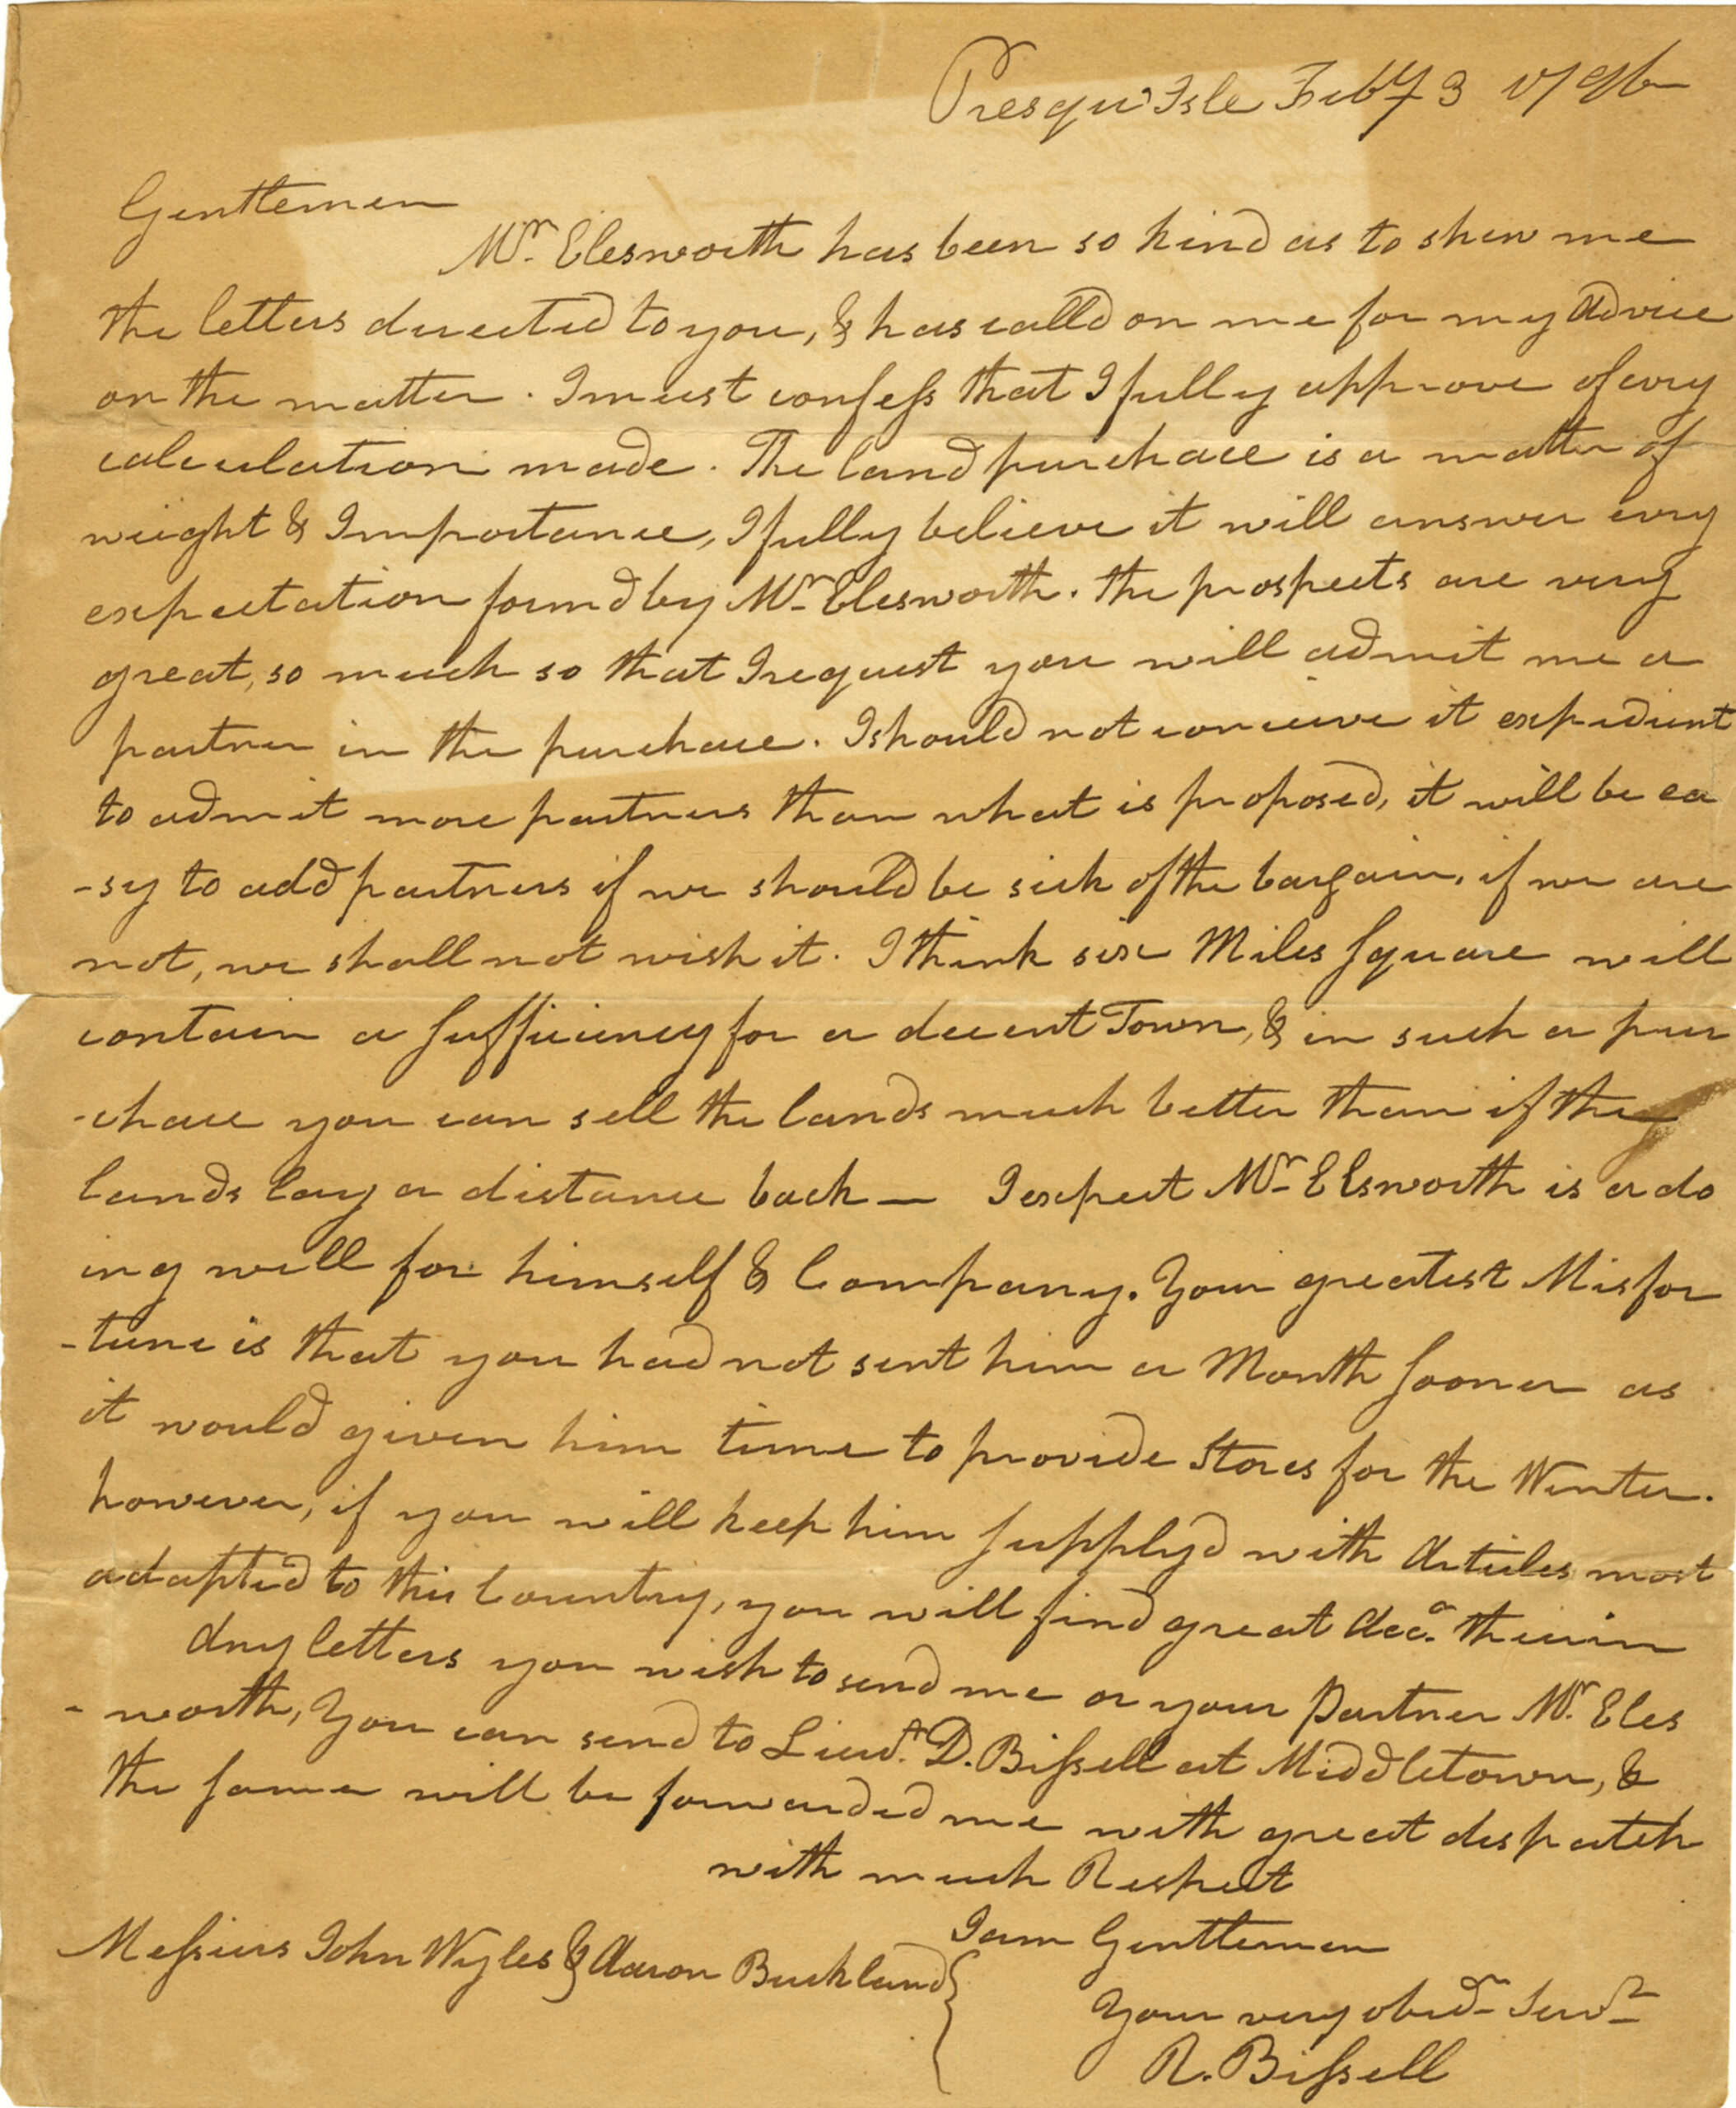 1796/02/03 Letter from Russell Bissell to John Wyles, Sr. and Aaron Buckland